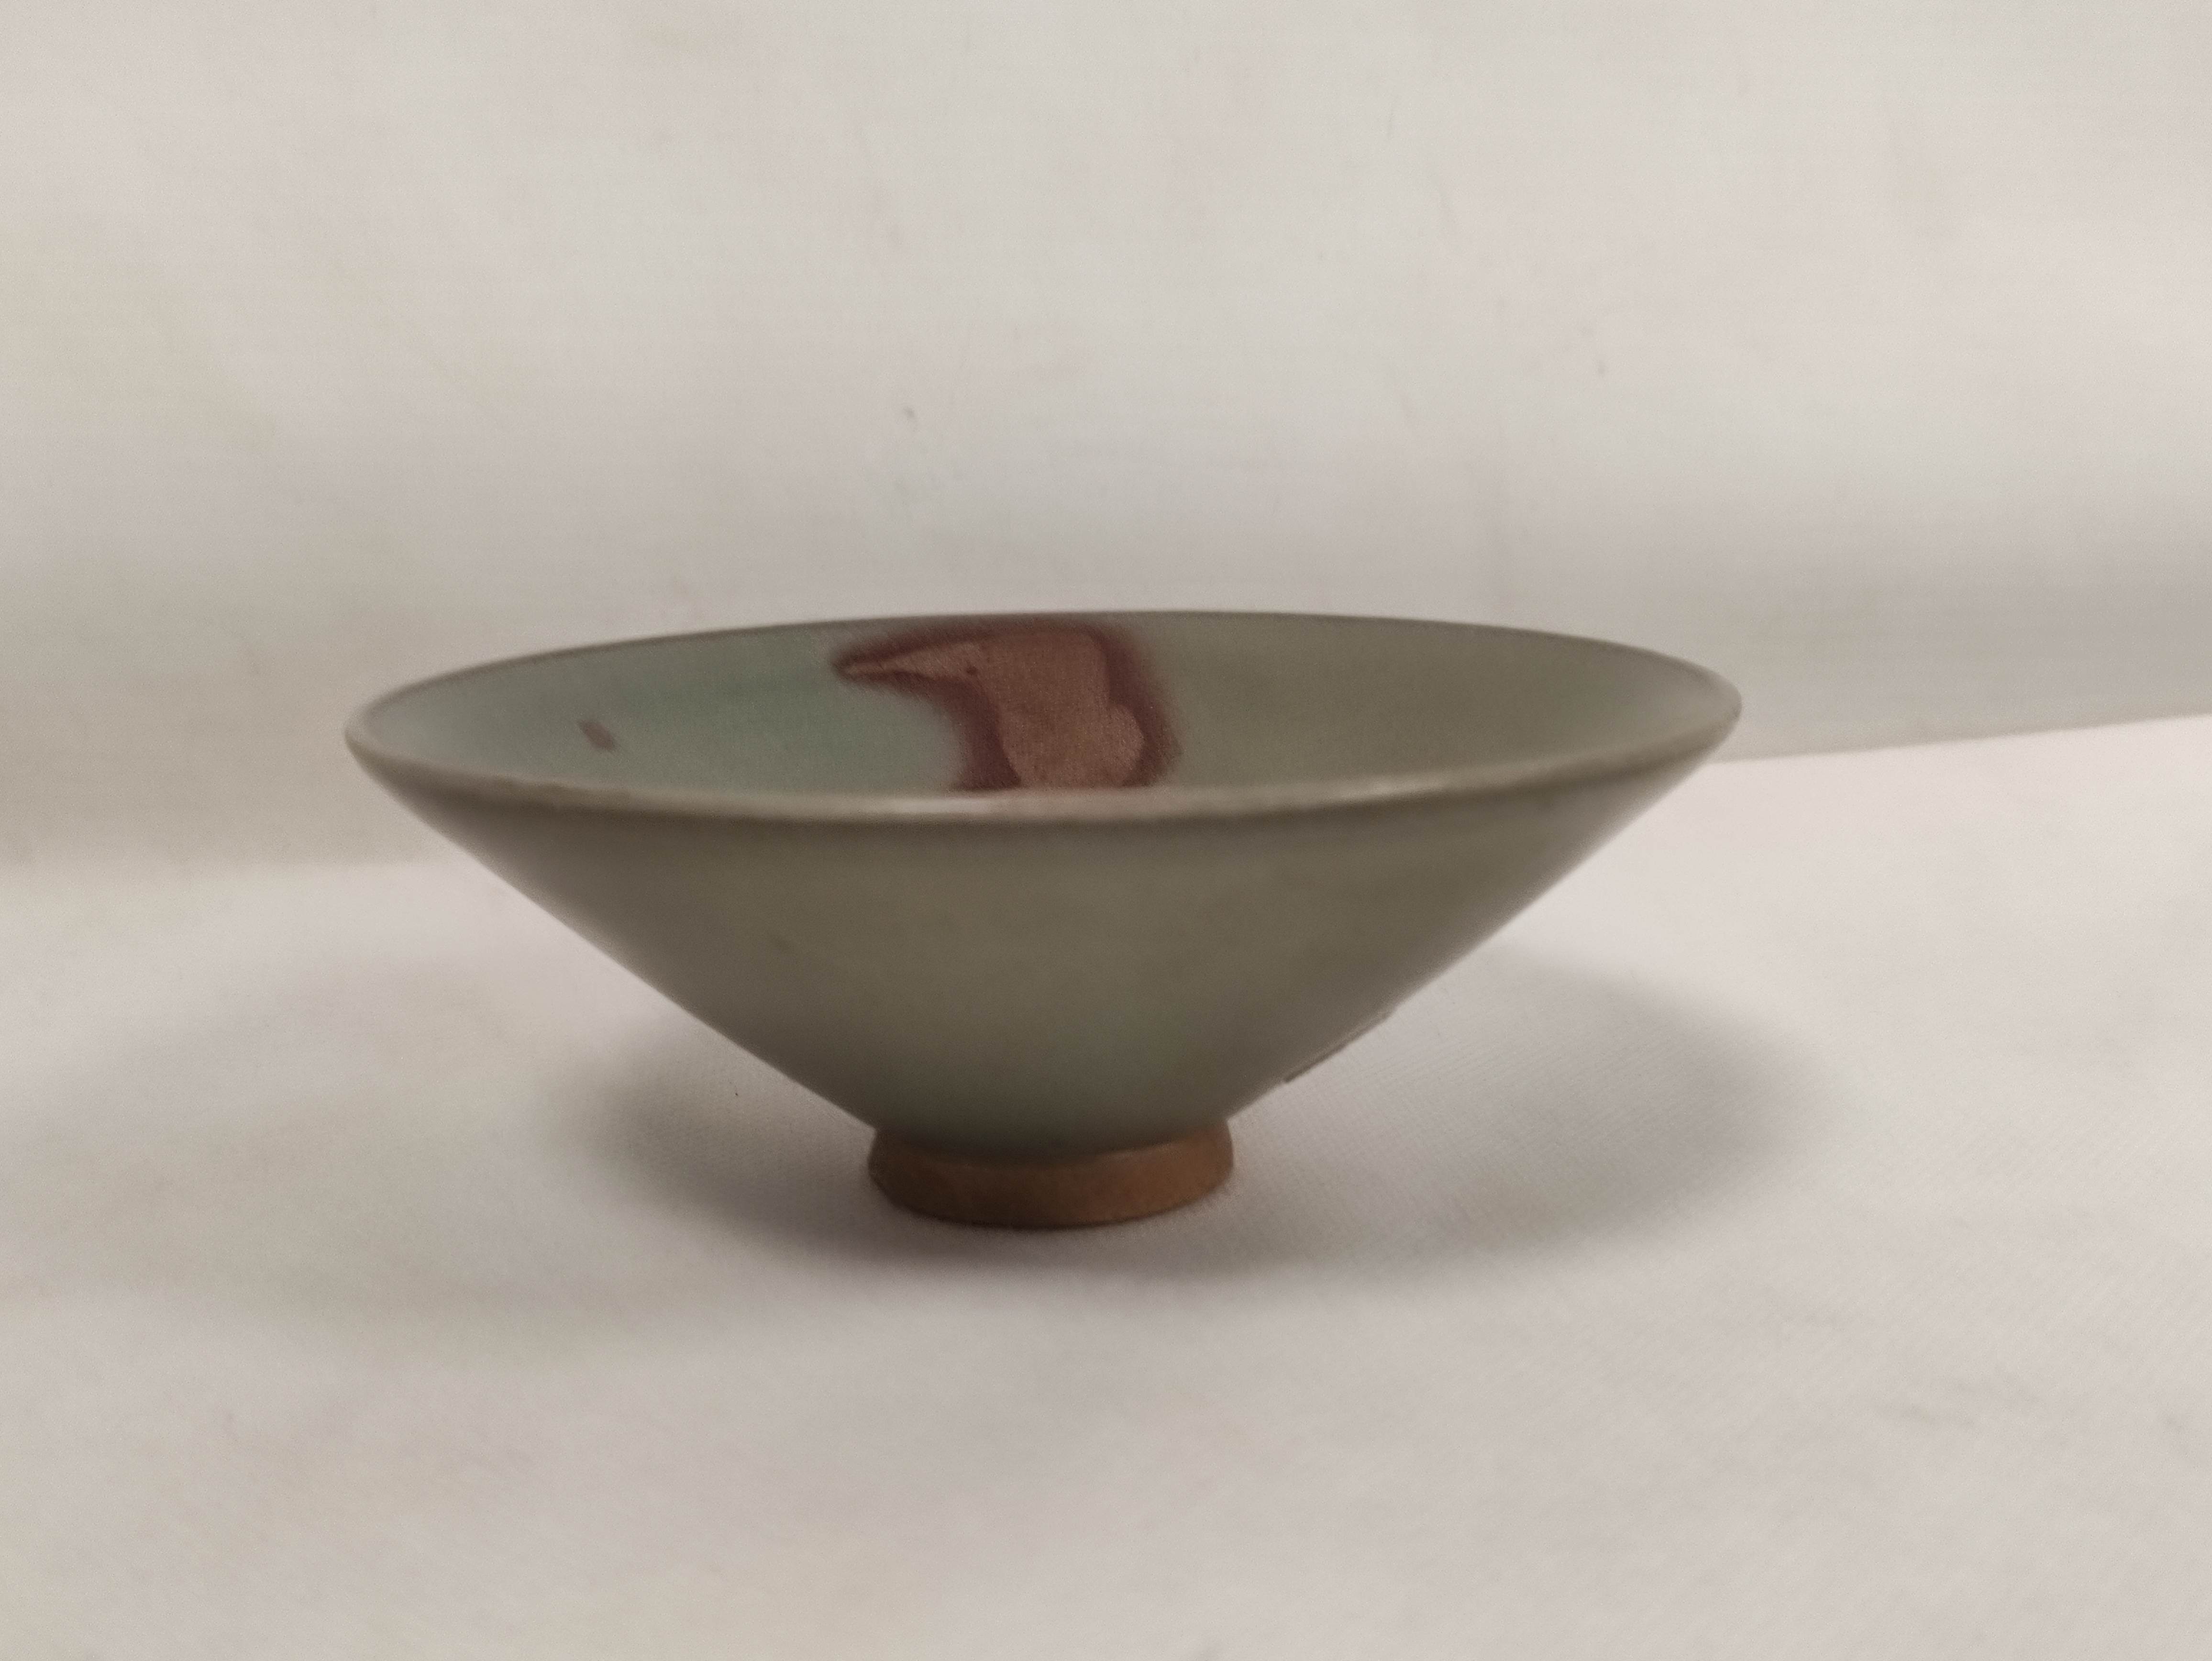 Chinese Junyao ware bowl in the Song dynasty style with purple splashes on a grey green ground.